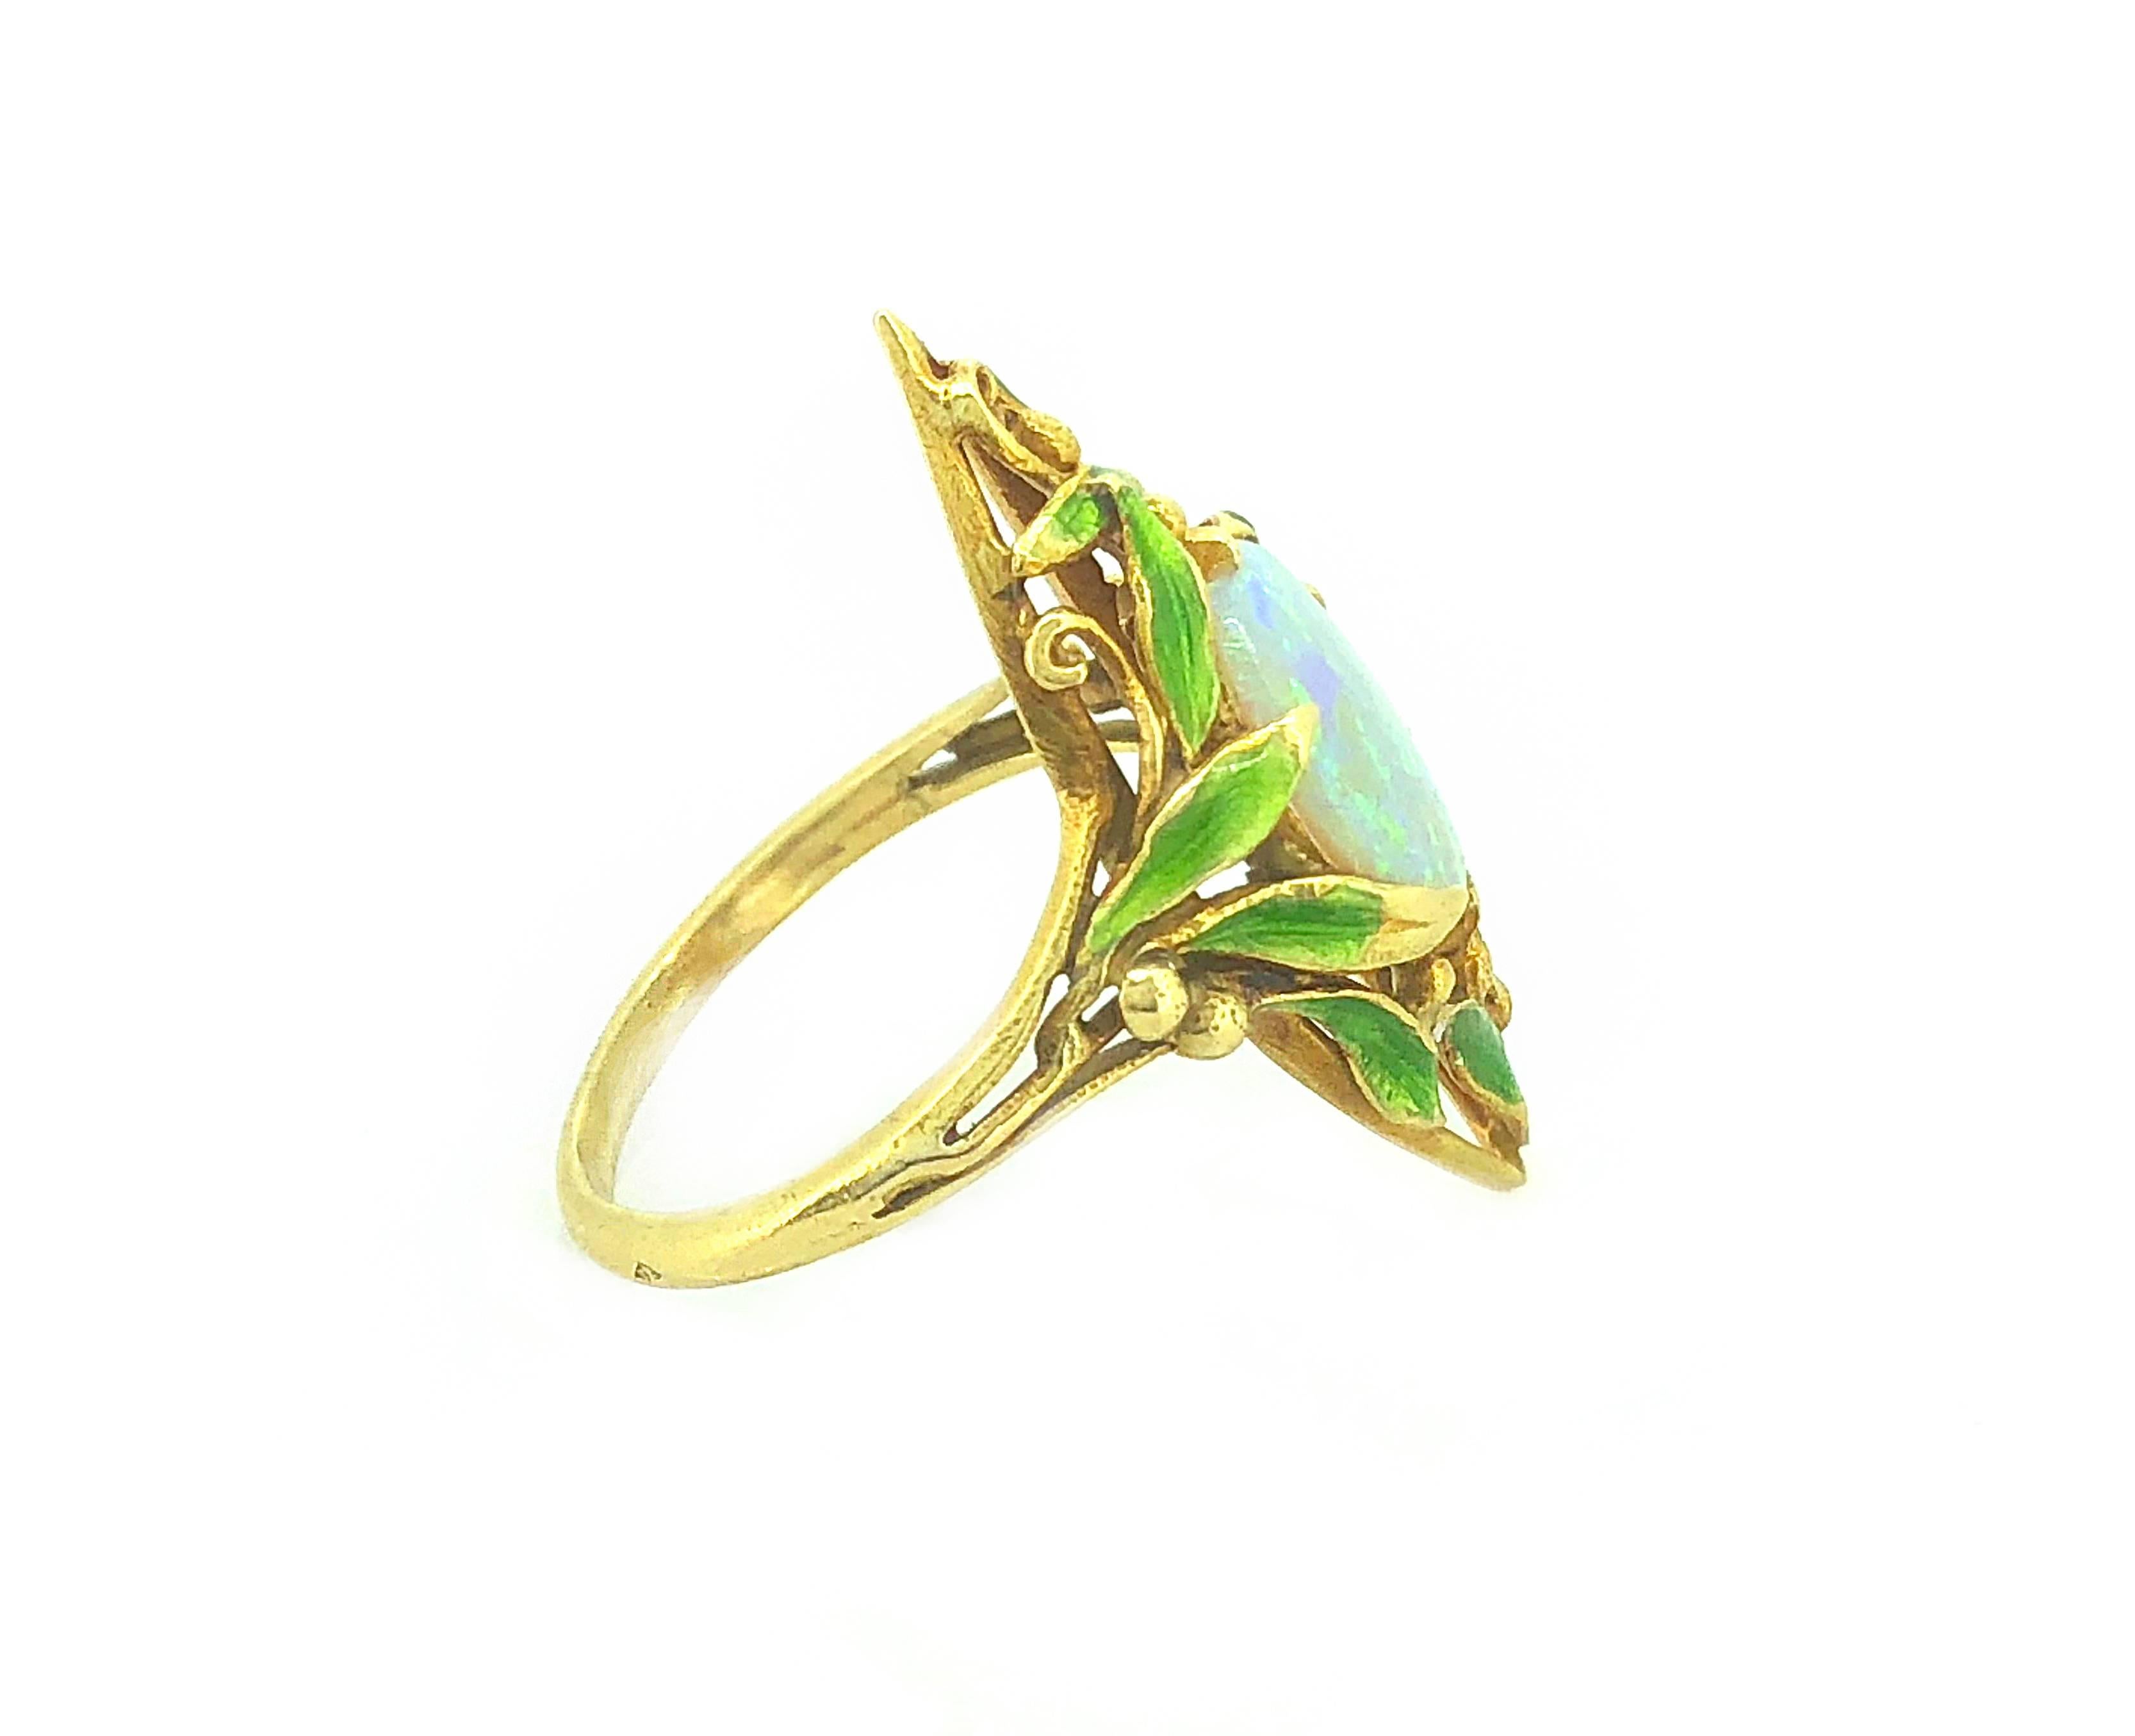 A very rare Art Nouveau opal and enamel Antique fashion ring featuring a 1.33ct. apx. opal that has a white base with lively blue and green color with some orange and purple. It is meticulously filigreed and possesses beautiful green enameling